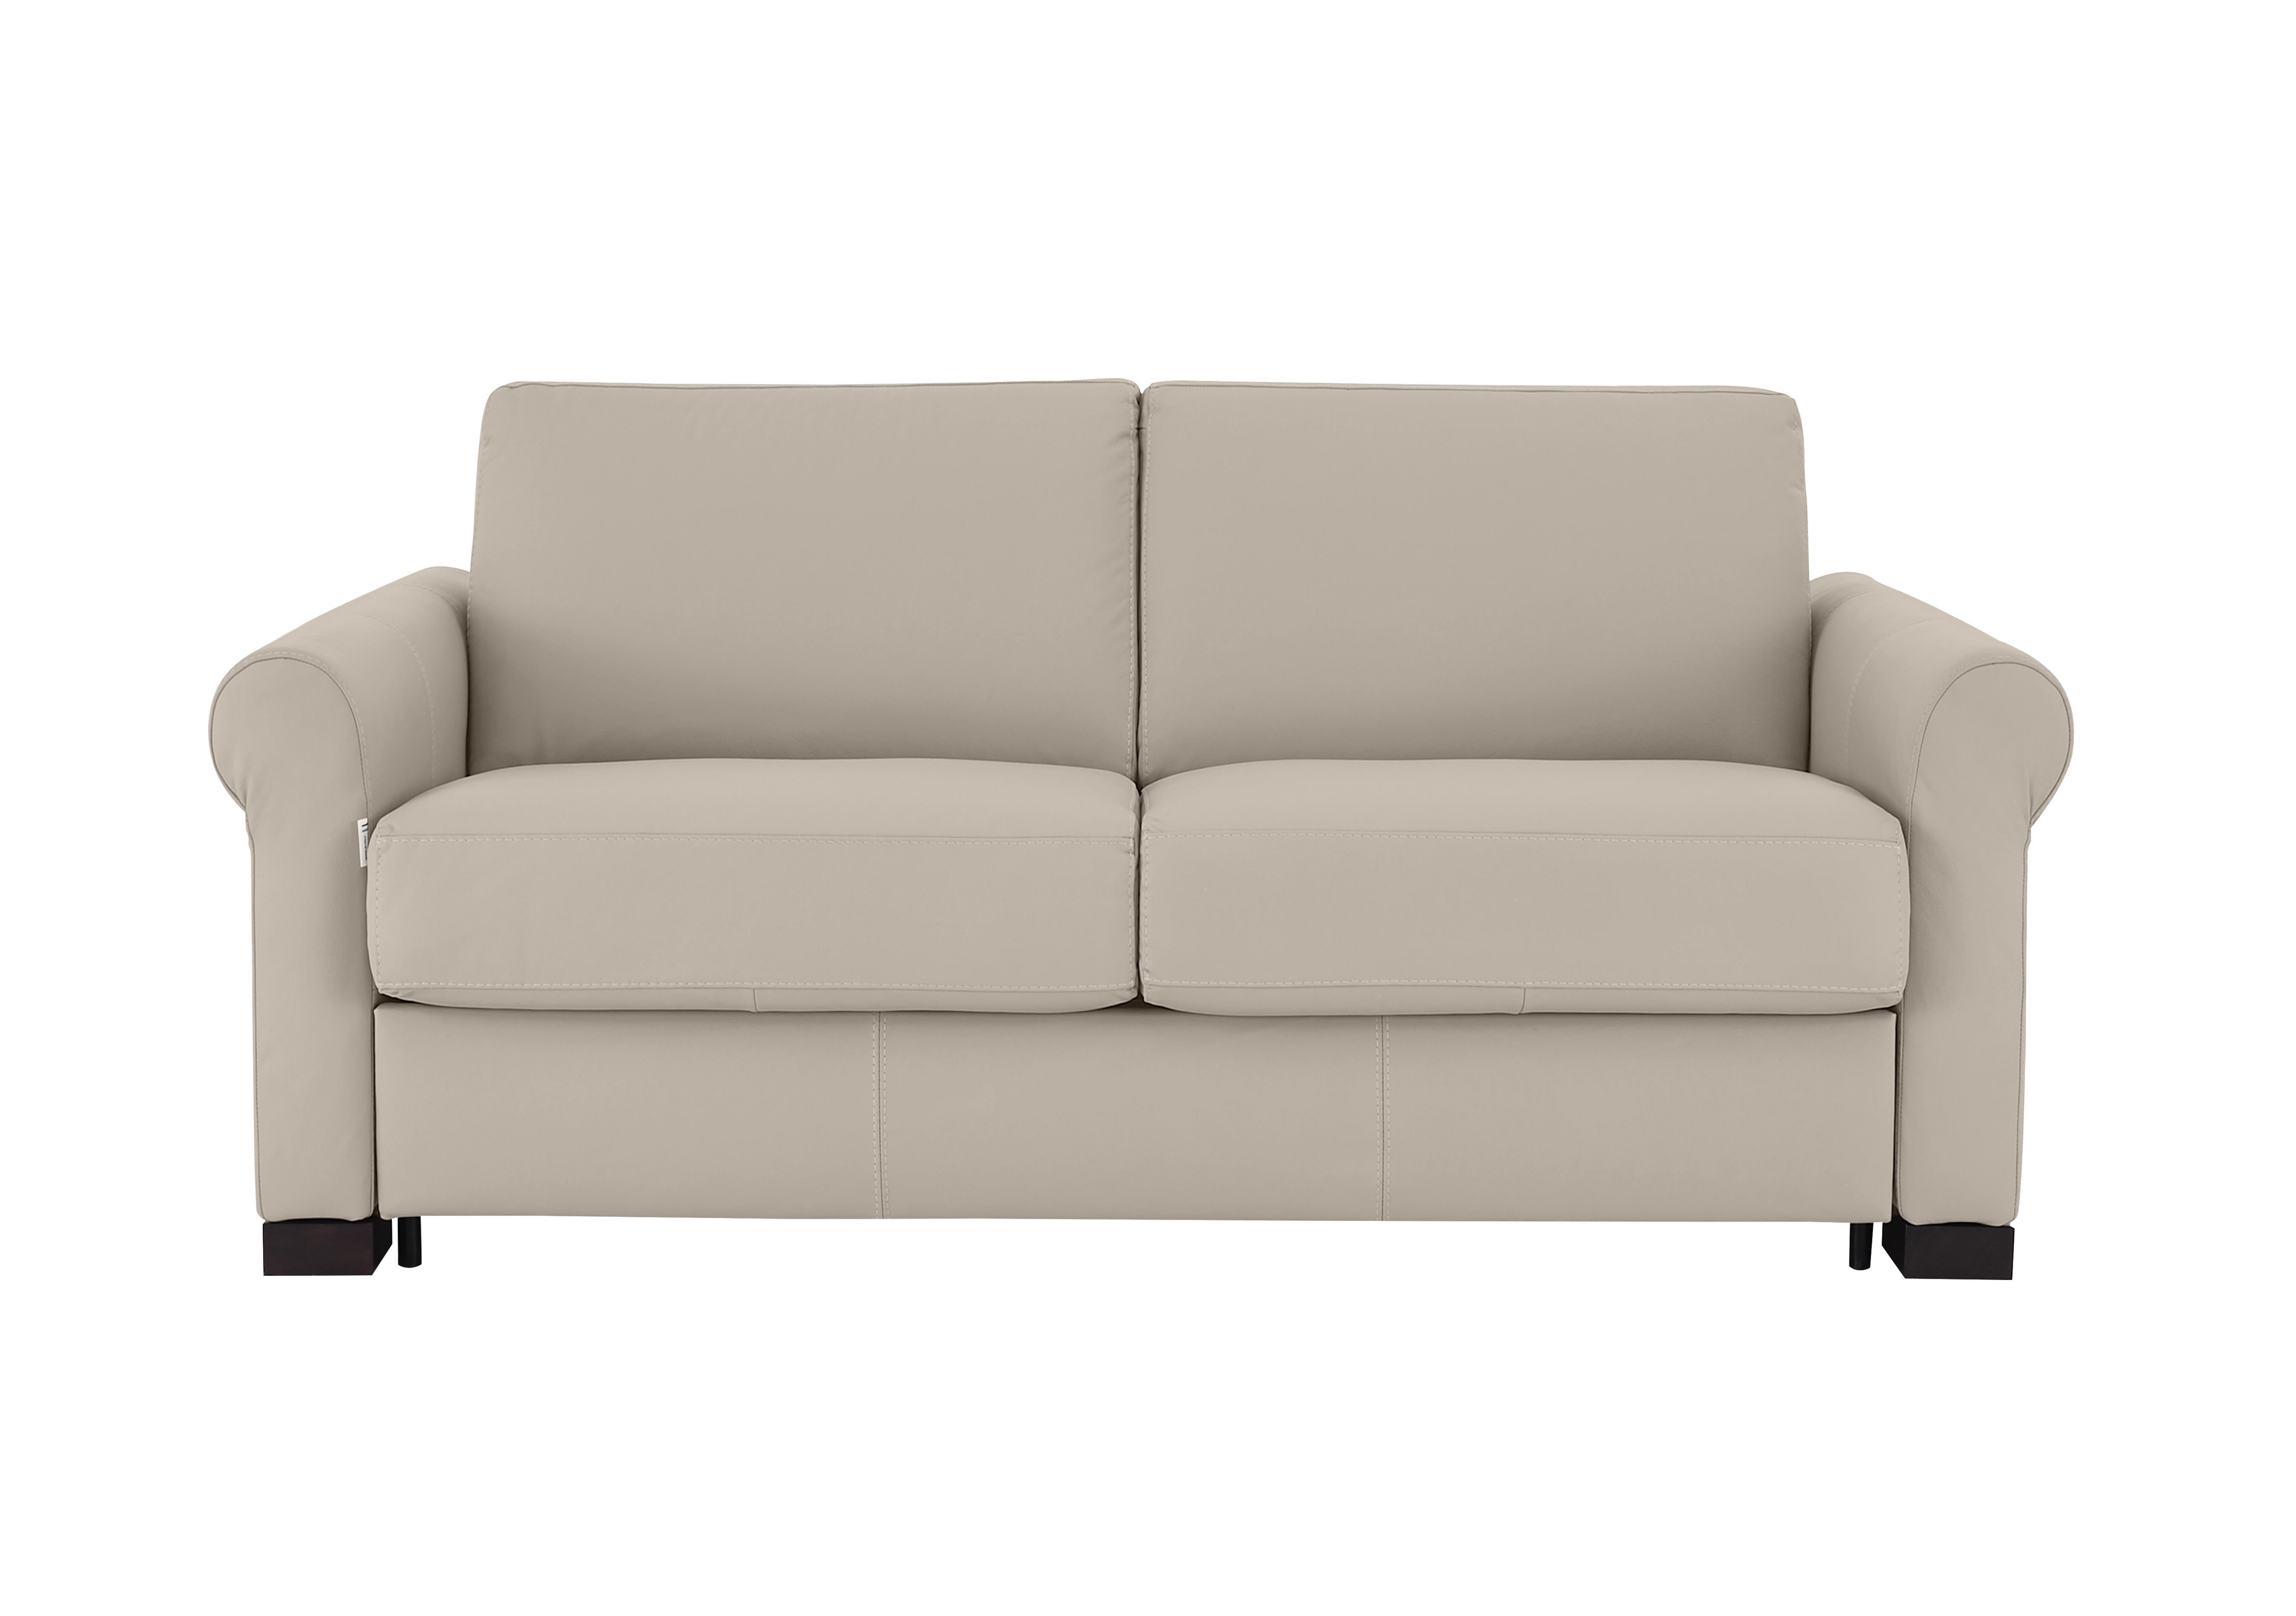 Alcova 2 Seater Leather Sofa Bed with Scroll Arms in Botero Crema 2156 on Furniture Village